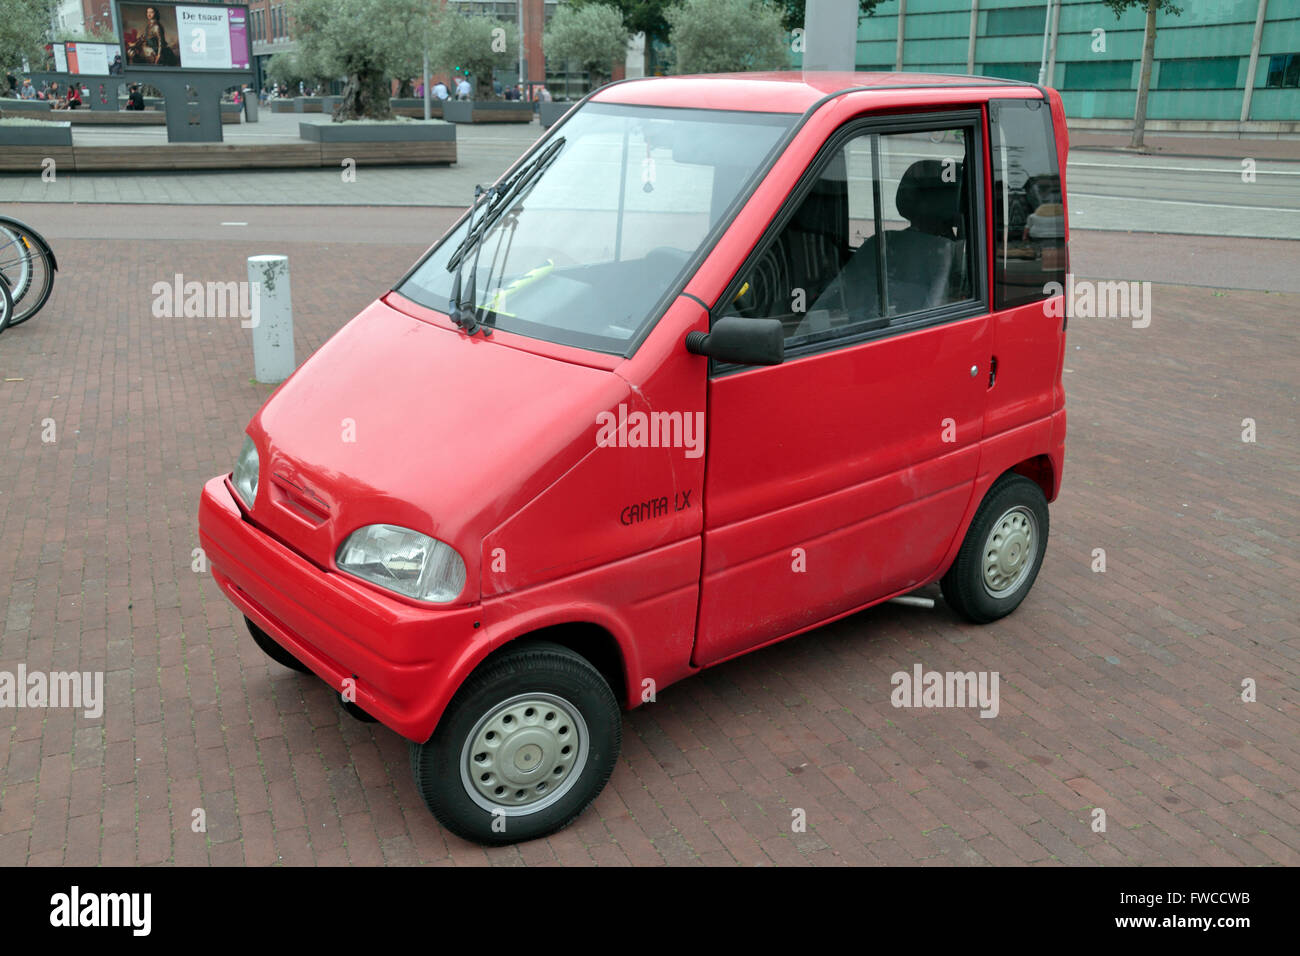 A Canta LX two-seat microcar specifically created for disabled drivers in the Netherlands, Amsterdam, Netherlands. Stock Photo